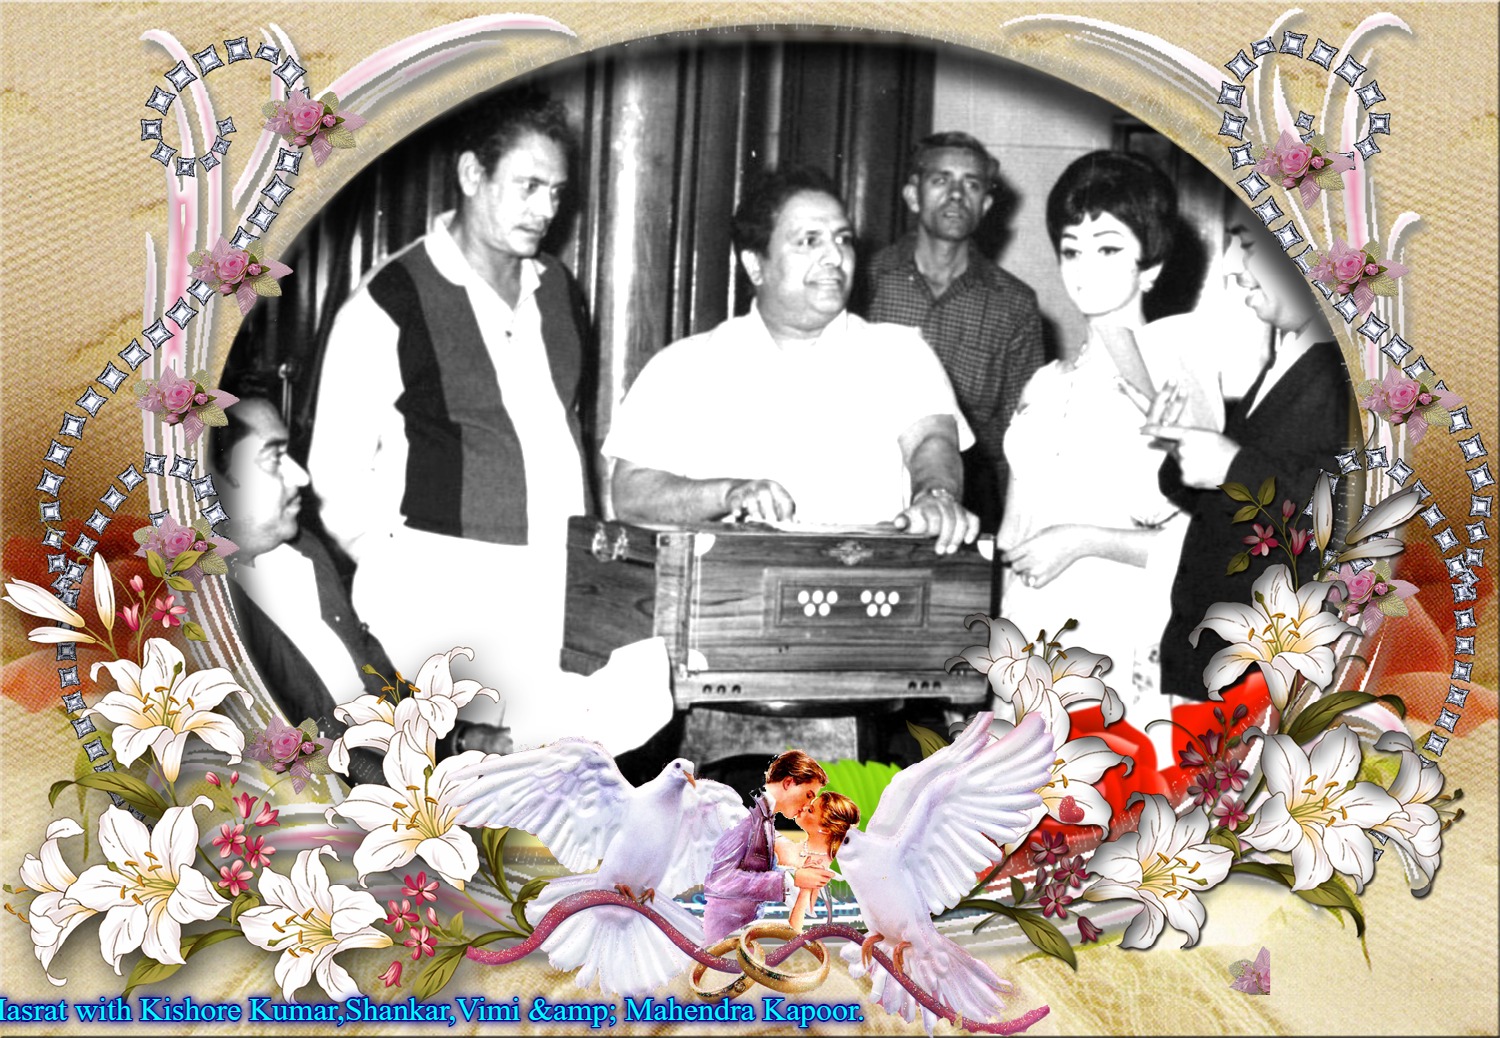 You are currently viewing “Lyricist Of Eminence- Hasrat Jaipuri”